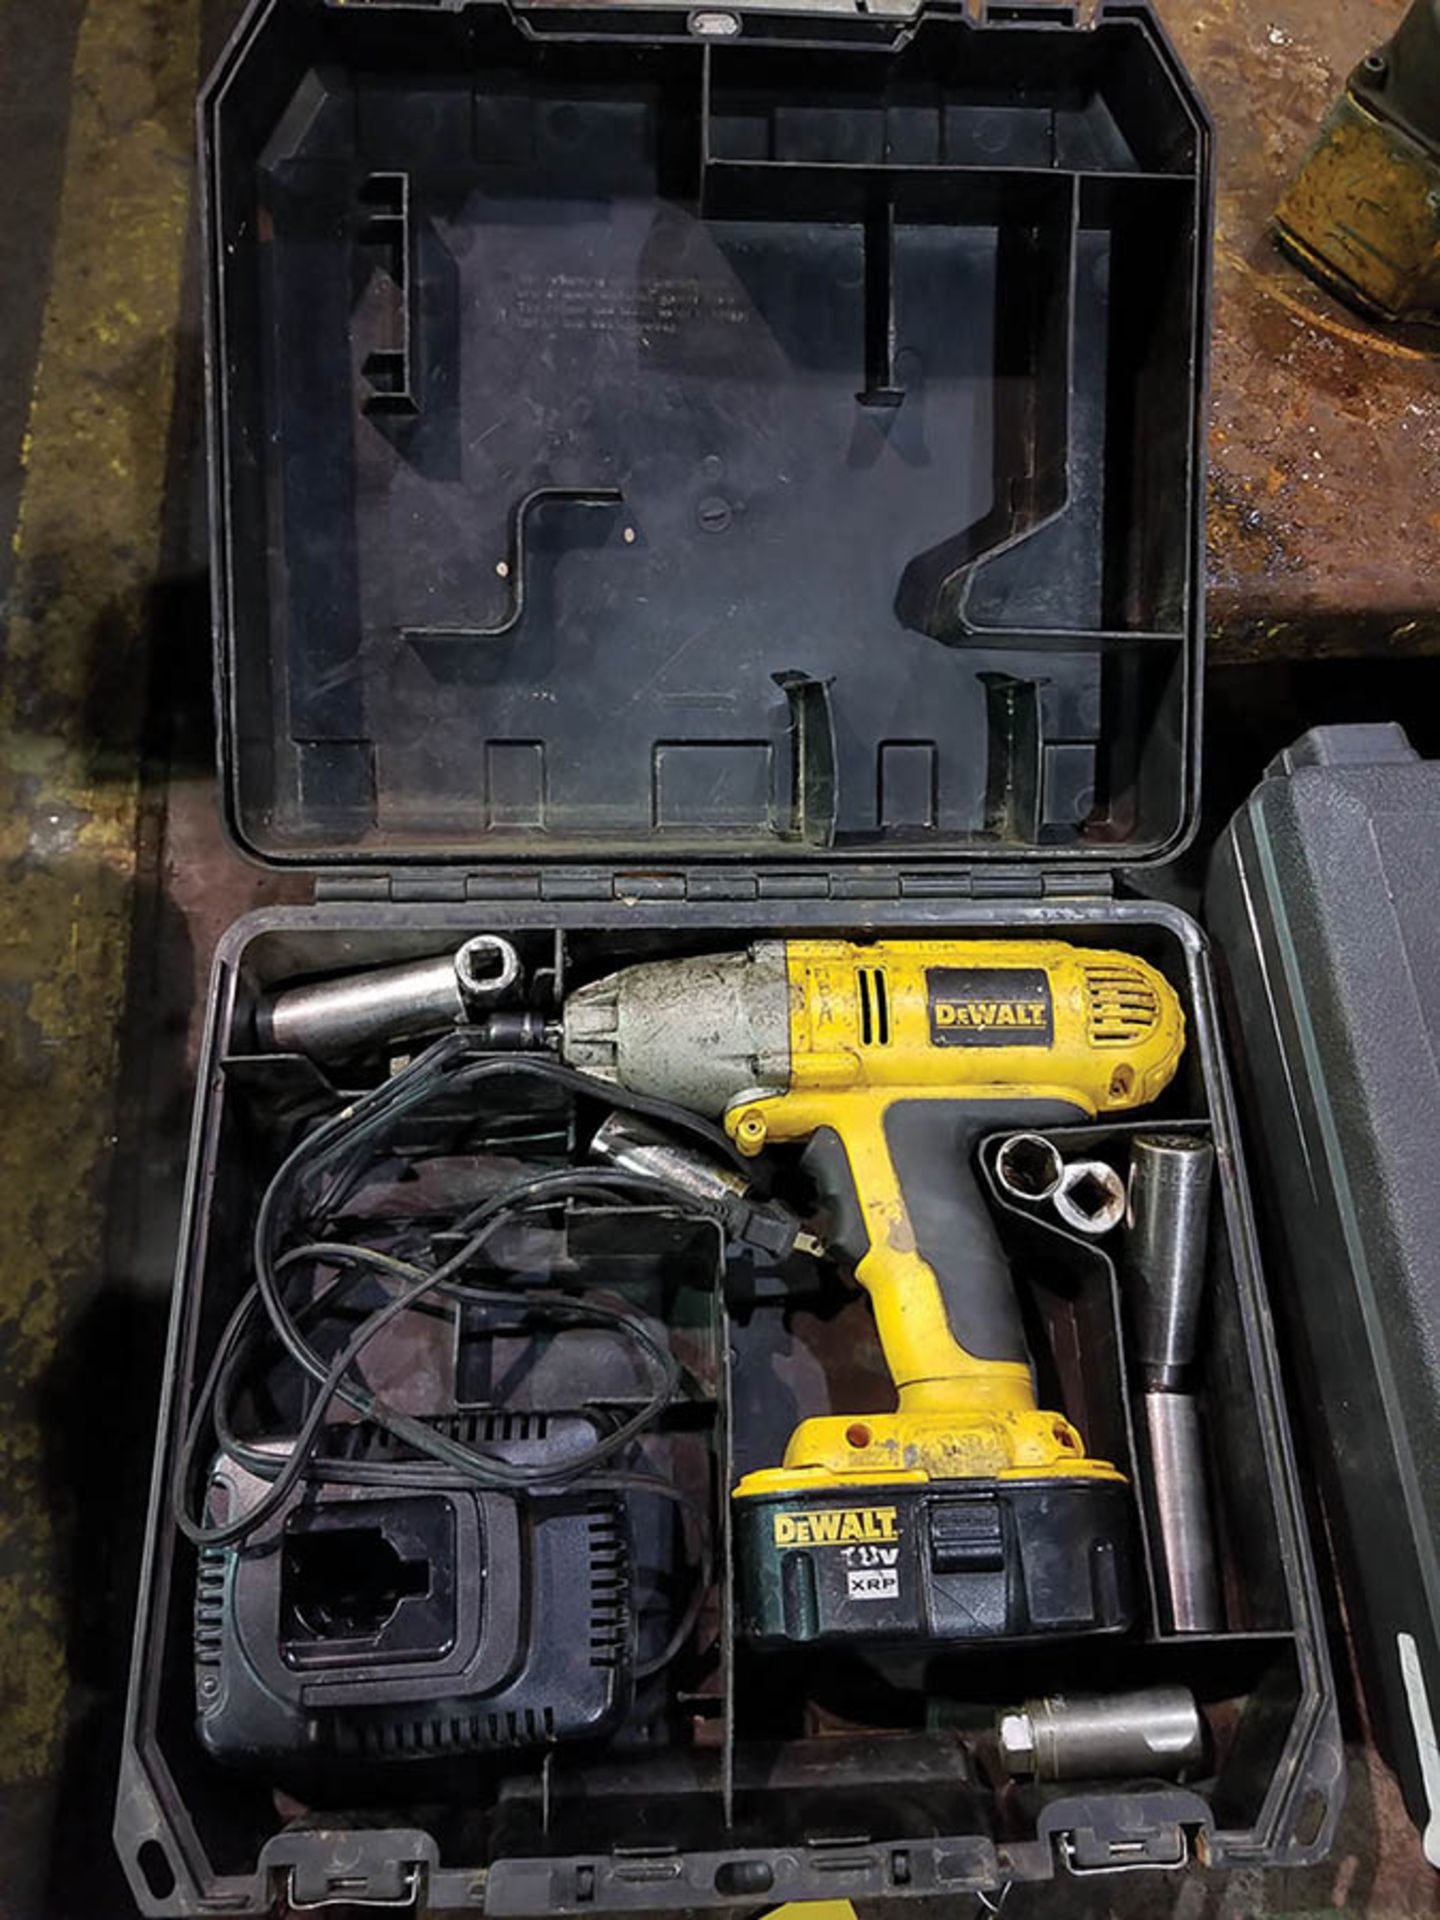 DEWALT HD 18V CORDLESS IMPACT WRENCH, MODEL DW059, 1/2" DRIVE, WITH CASE, CHARGER, AND ASSORTED